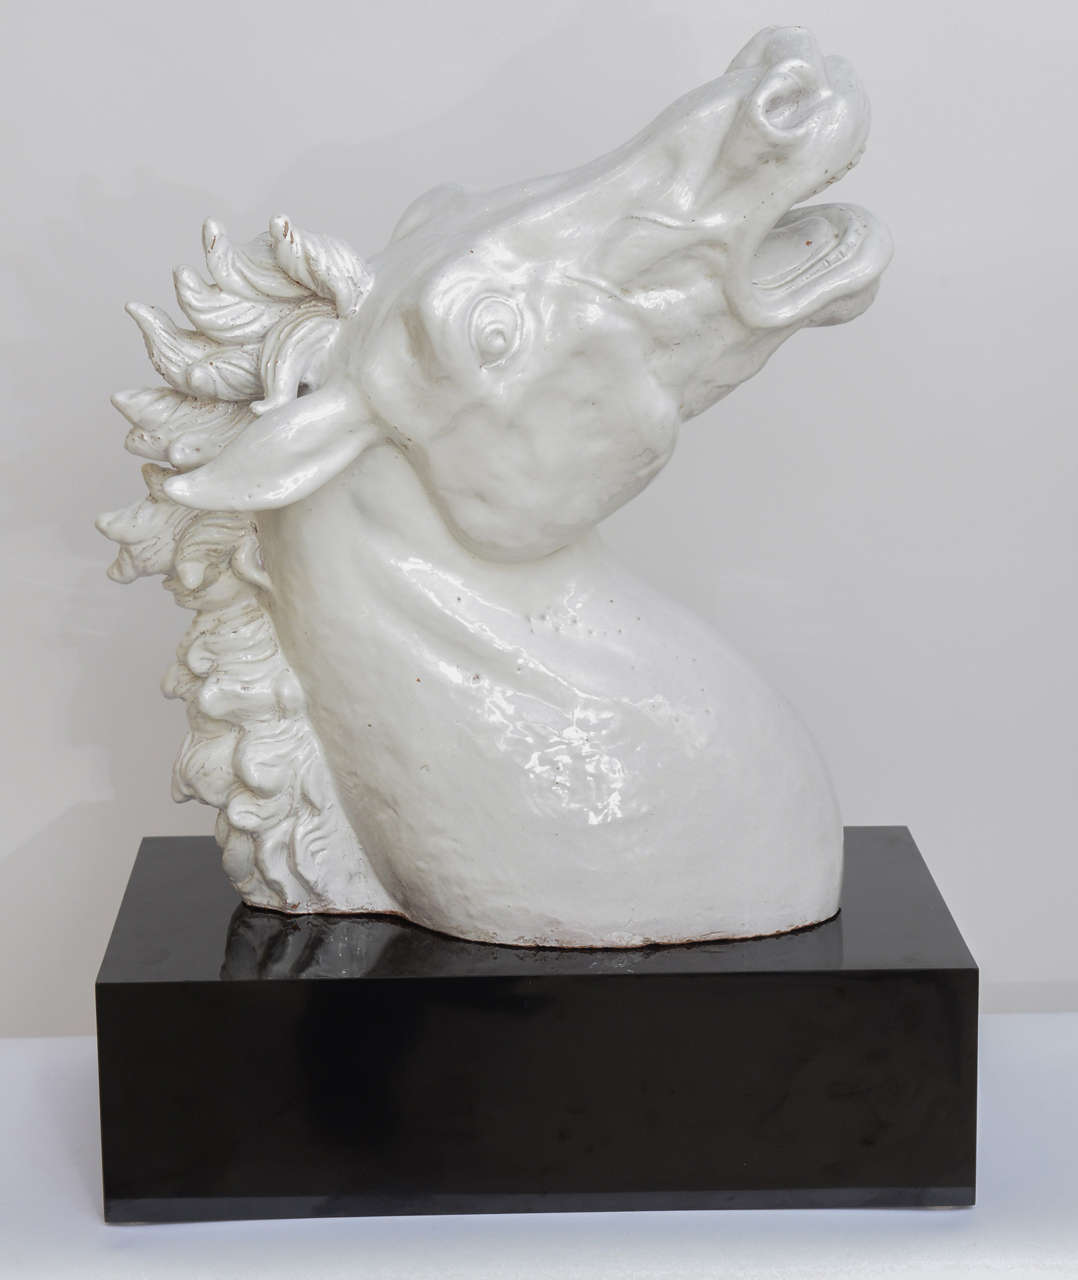 Life size Sculpture of a Terracotta White Glazed Horse Head on Black Lacquer stand.
Great condition, no chips or repairs.